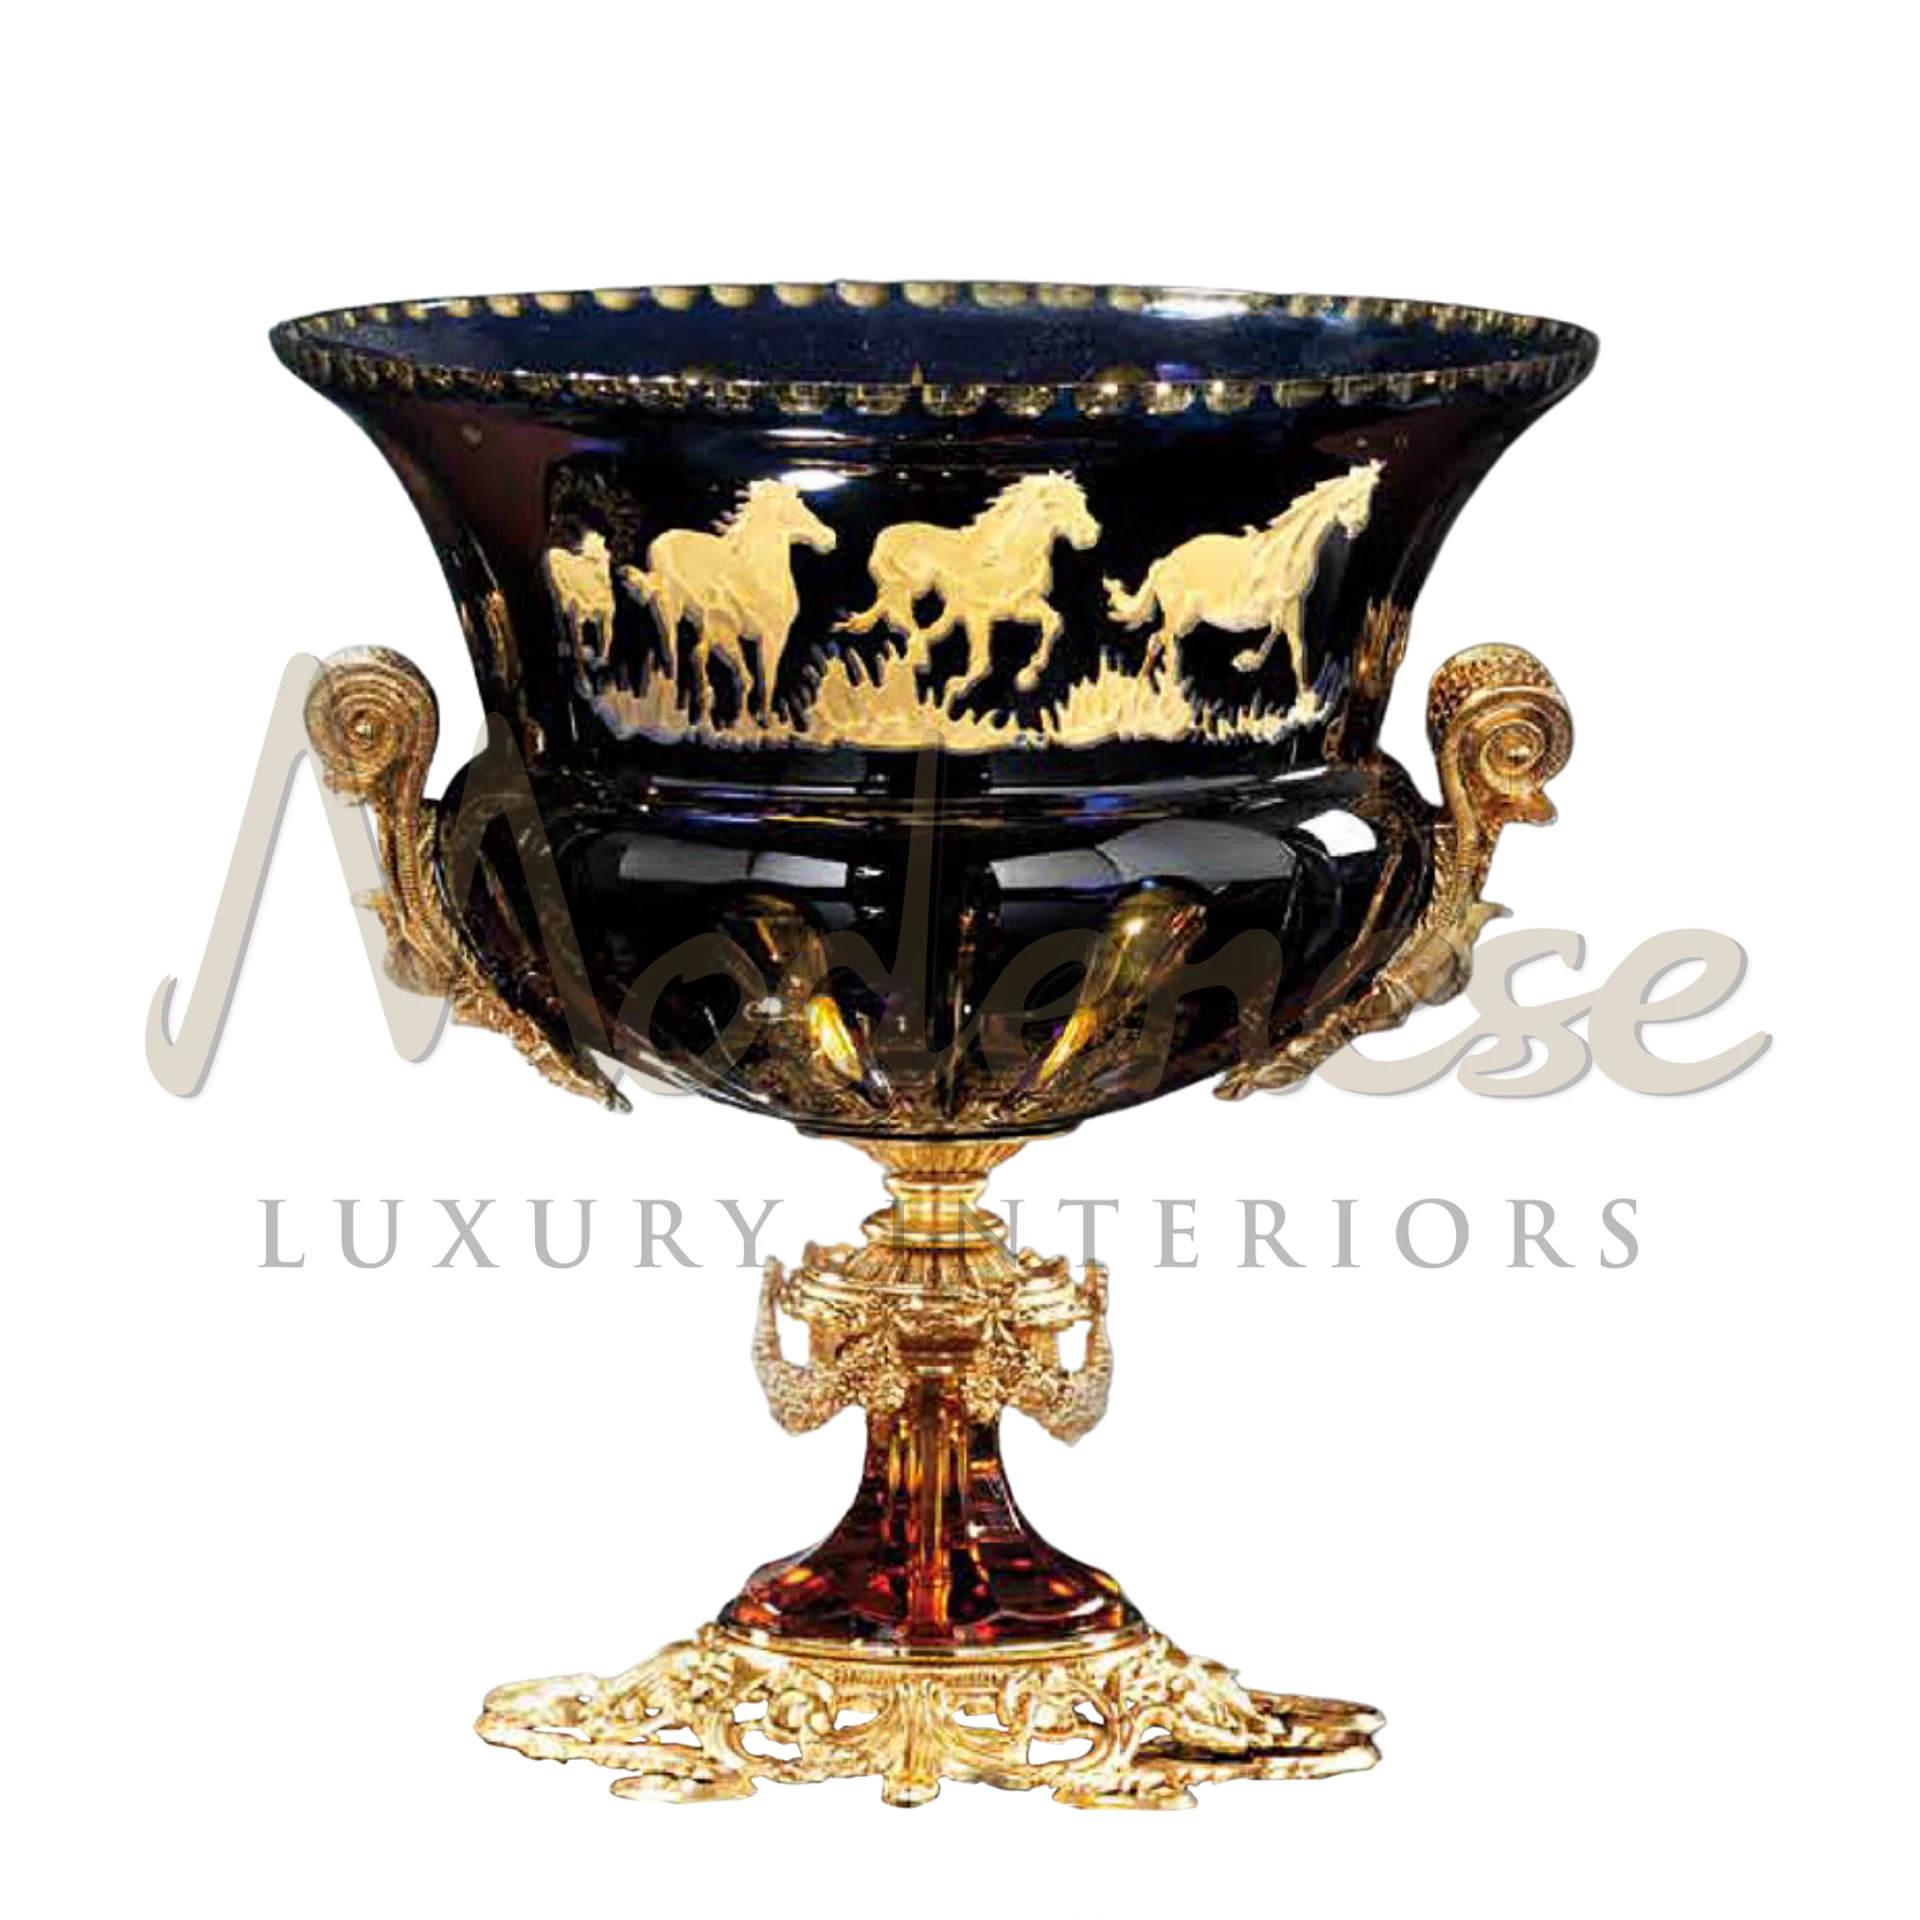 Classical Horse Ornamented Glass Vase by Modenese, blending ancient art with modern luxury for sophisticated interiors.